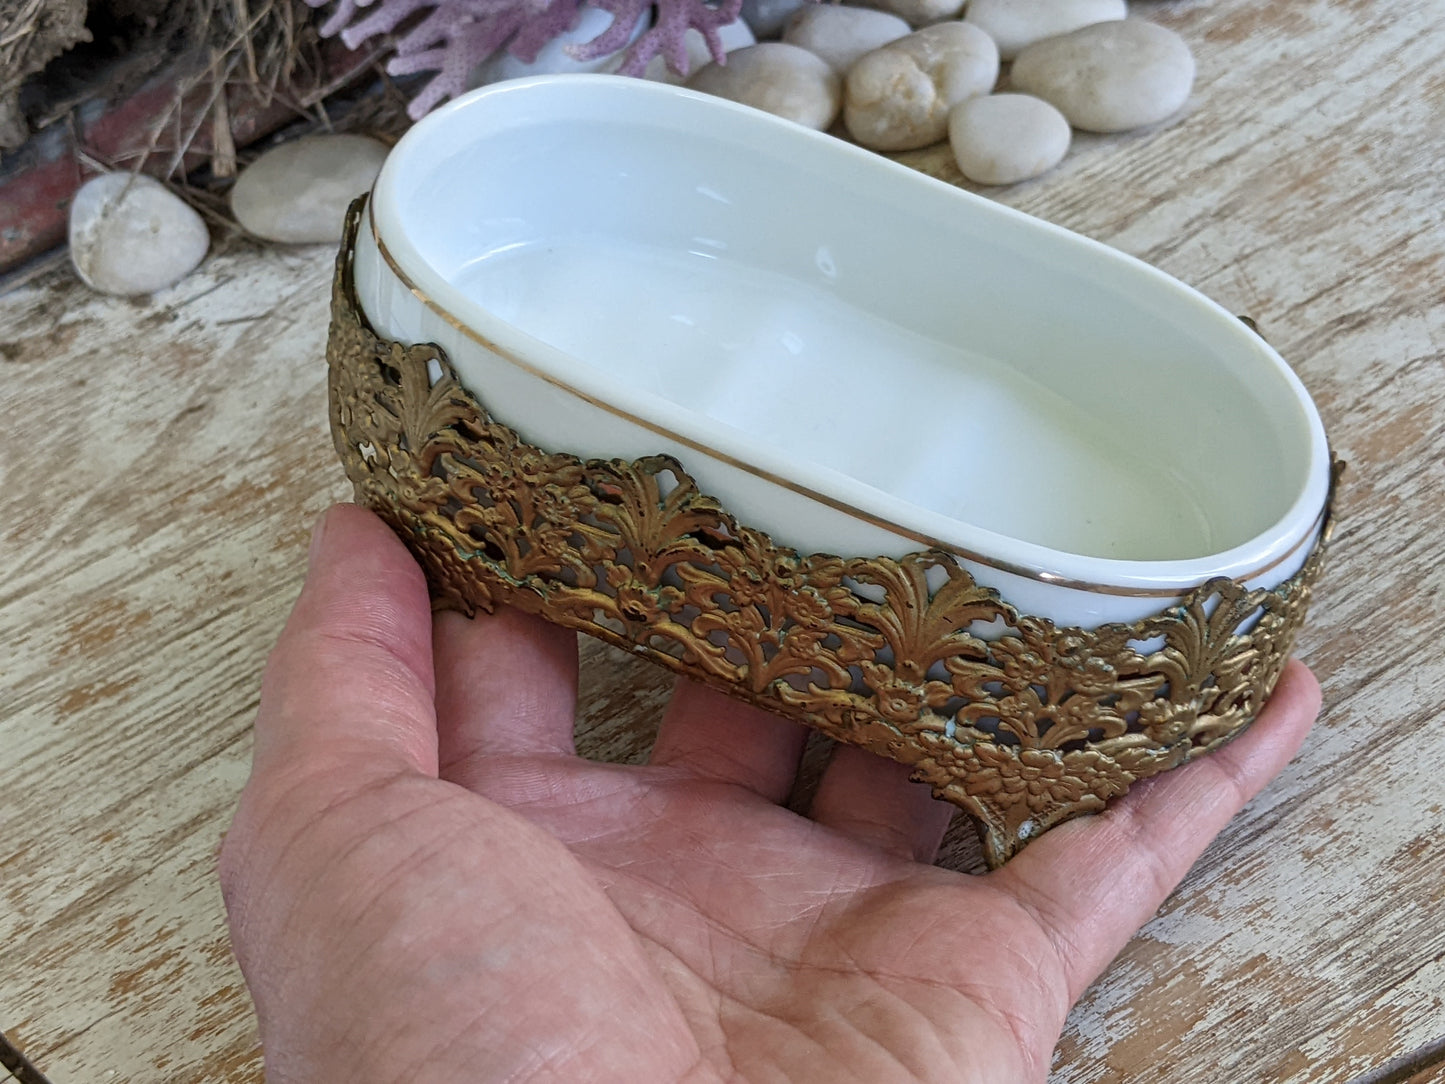 Vintage Soap Dish Holder Retro Porcelain Gold Finish Metal Footed Shell Bathroom Display Tray !! Vintage Decor Personal Spa !!